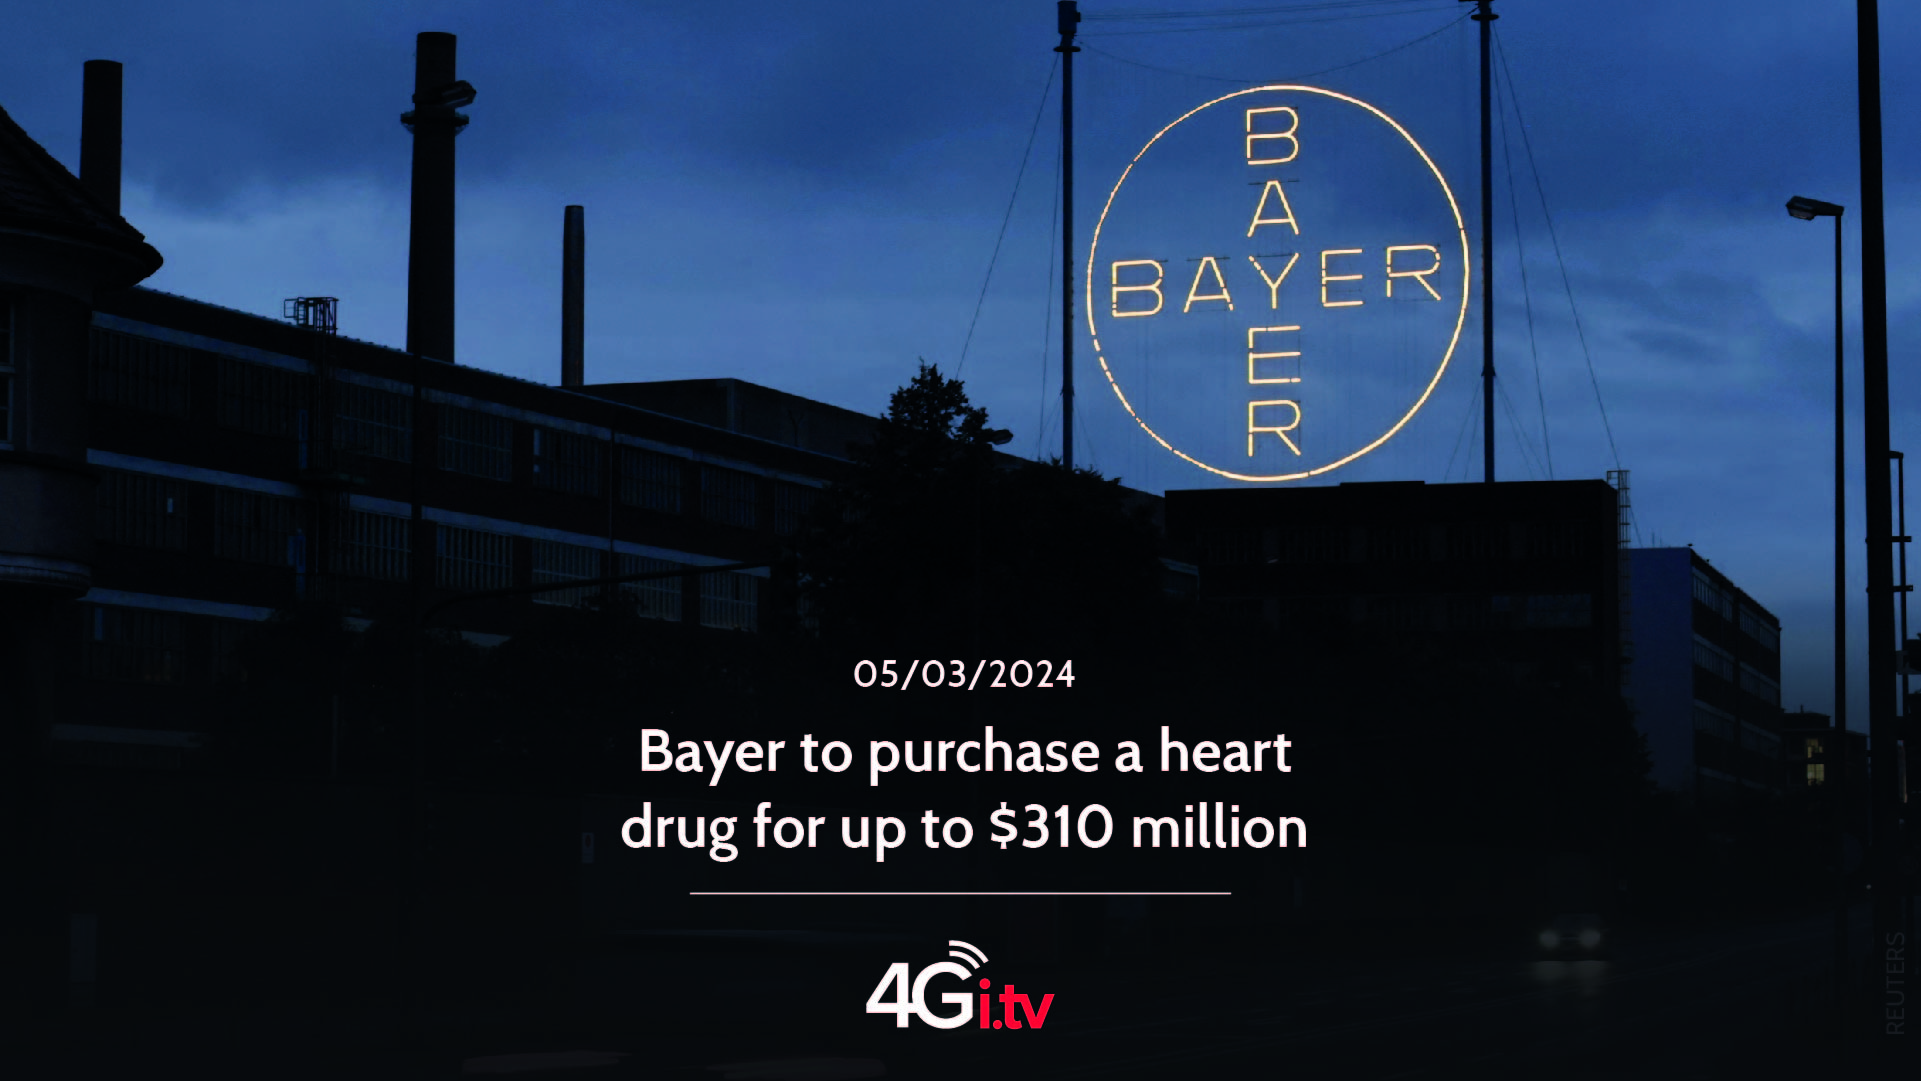 Подробнее о статье Bayer to purchase a heart drug for up to $310 million